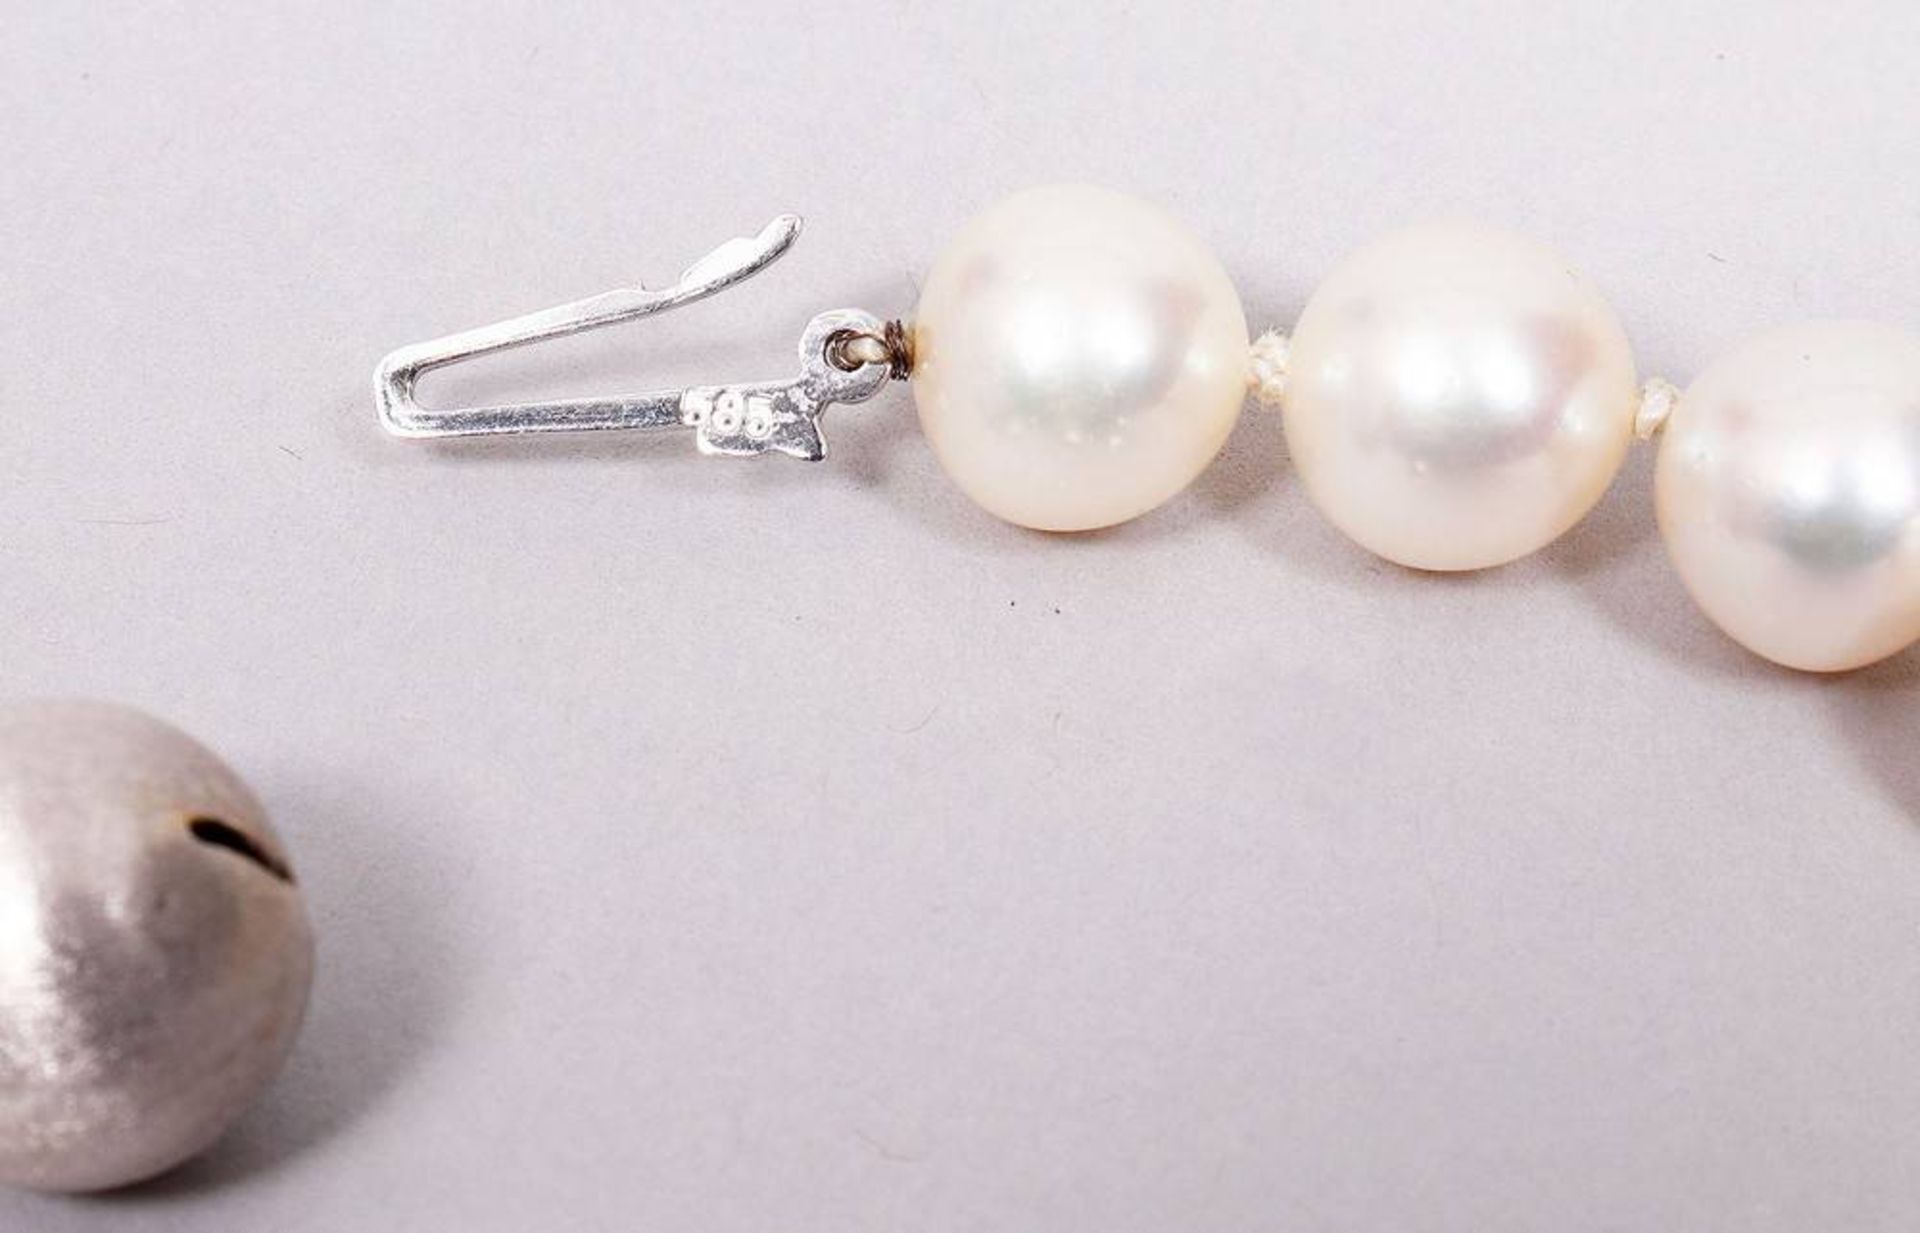 Pearl necklace, 585 WG ball clasp - Image 4 of 4